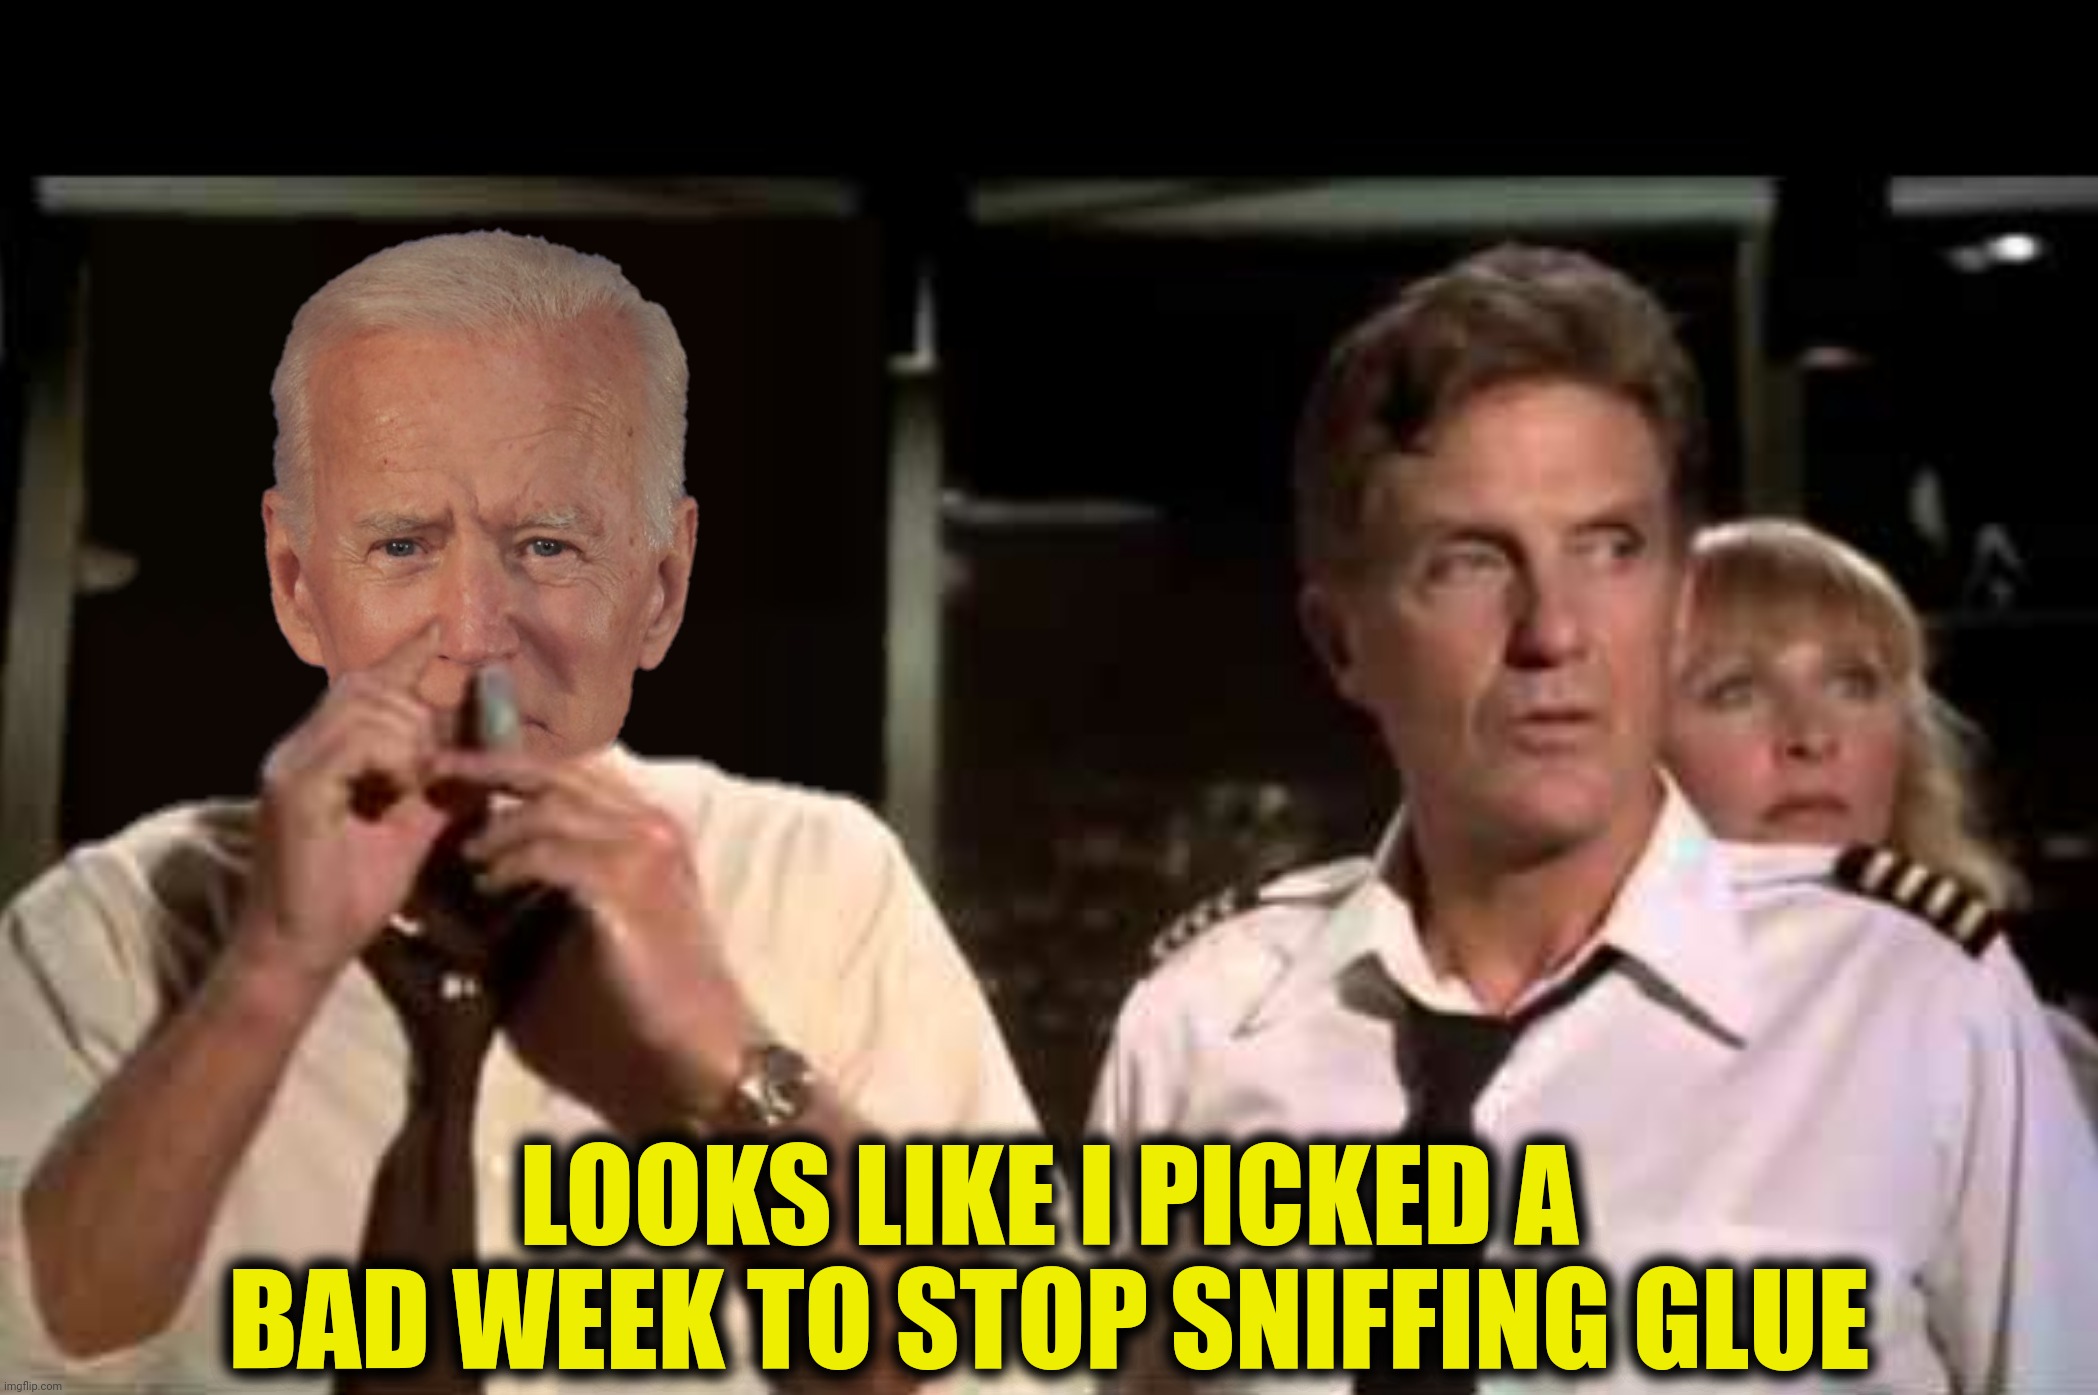 LOOKS LIKE I PICKED A BAD WEEK TO STOP SNIFFING GLUE | made w/ Imgflip meme maker